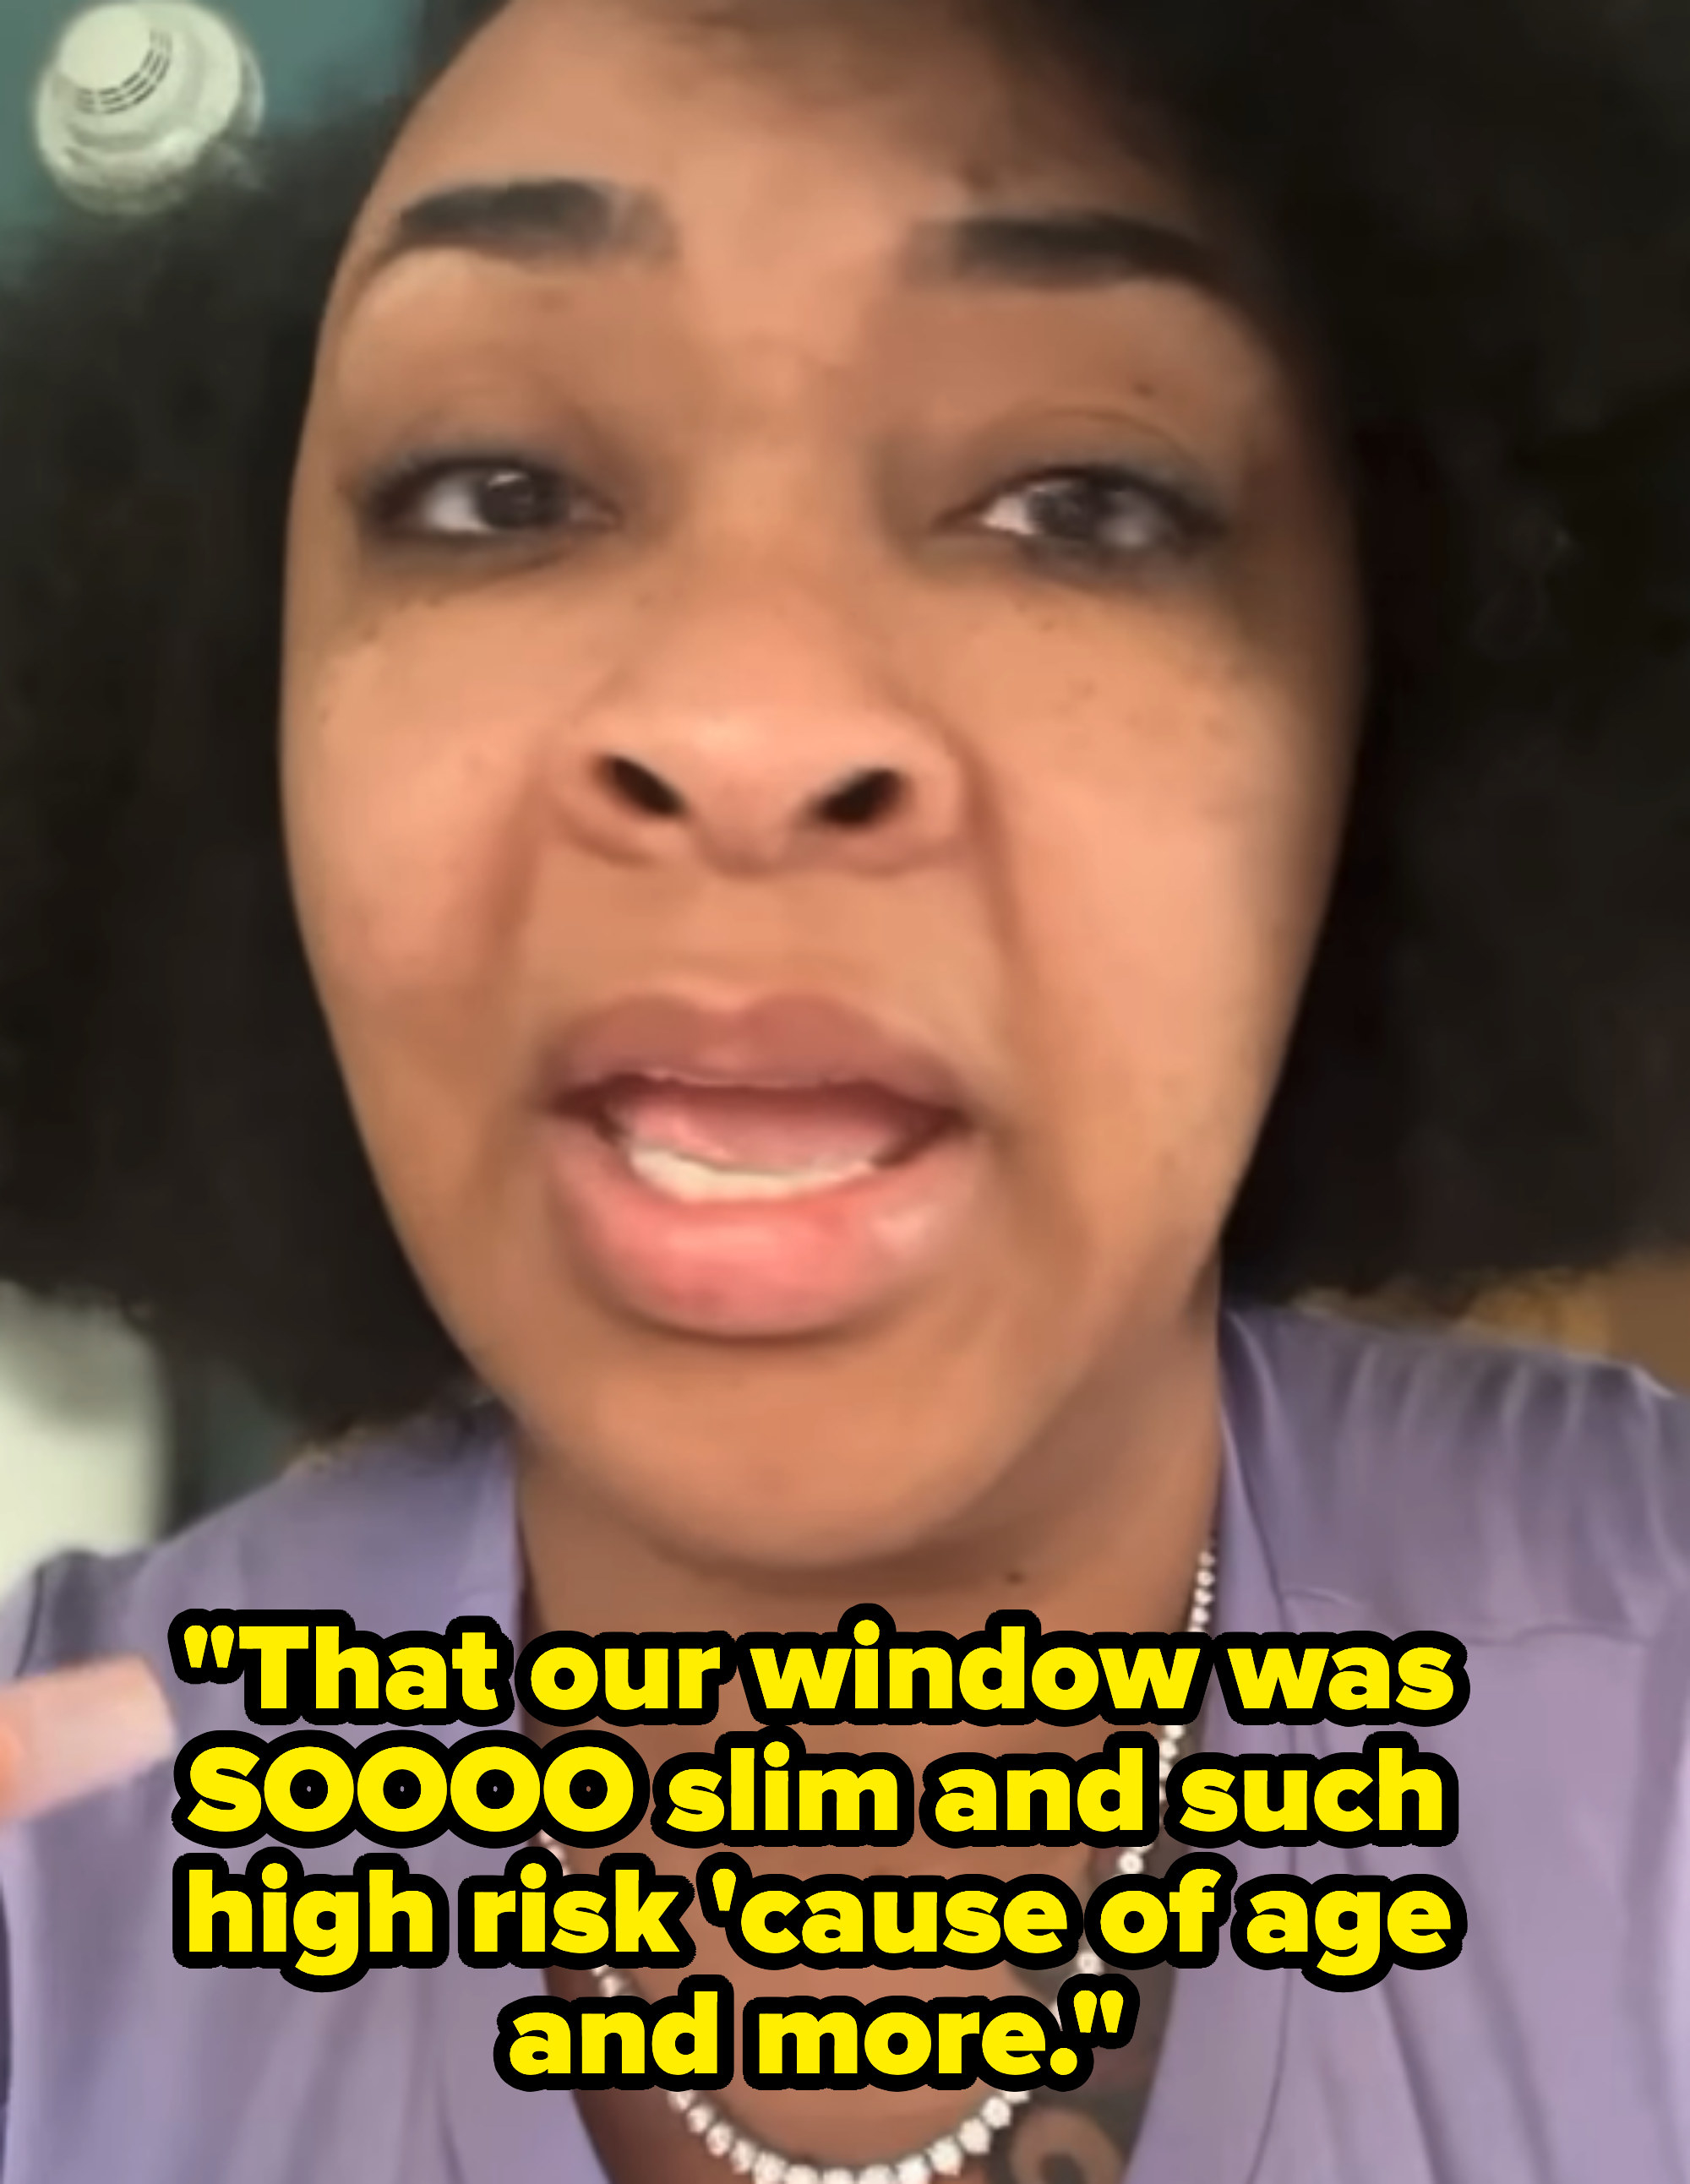 She says that their window was so slim and such high risk &#x27;cause of age and more